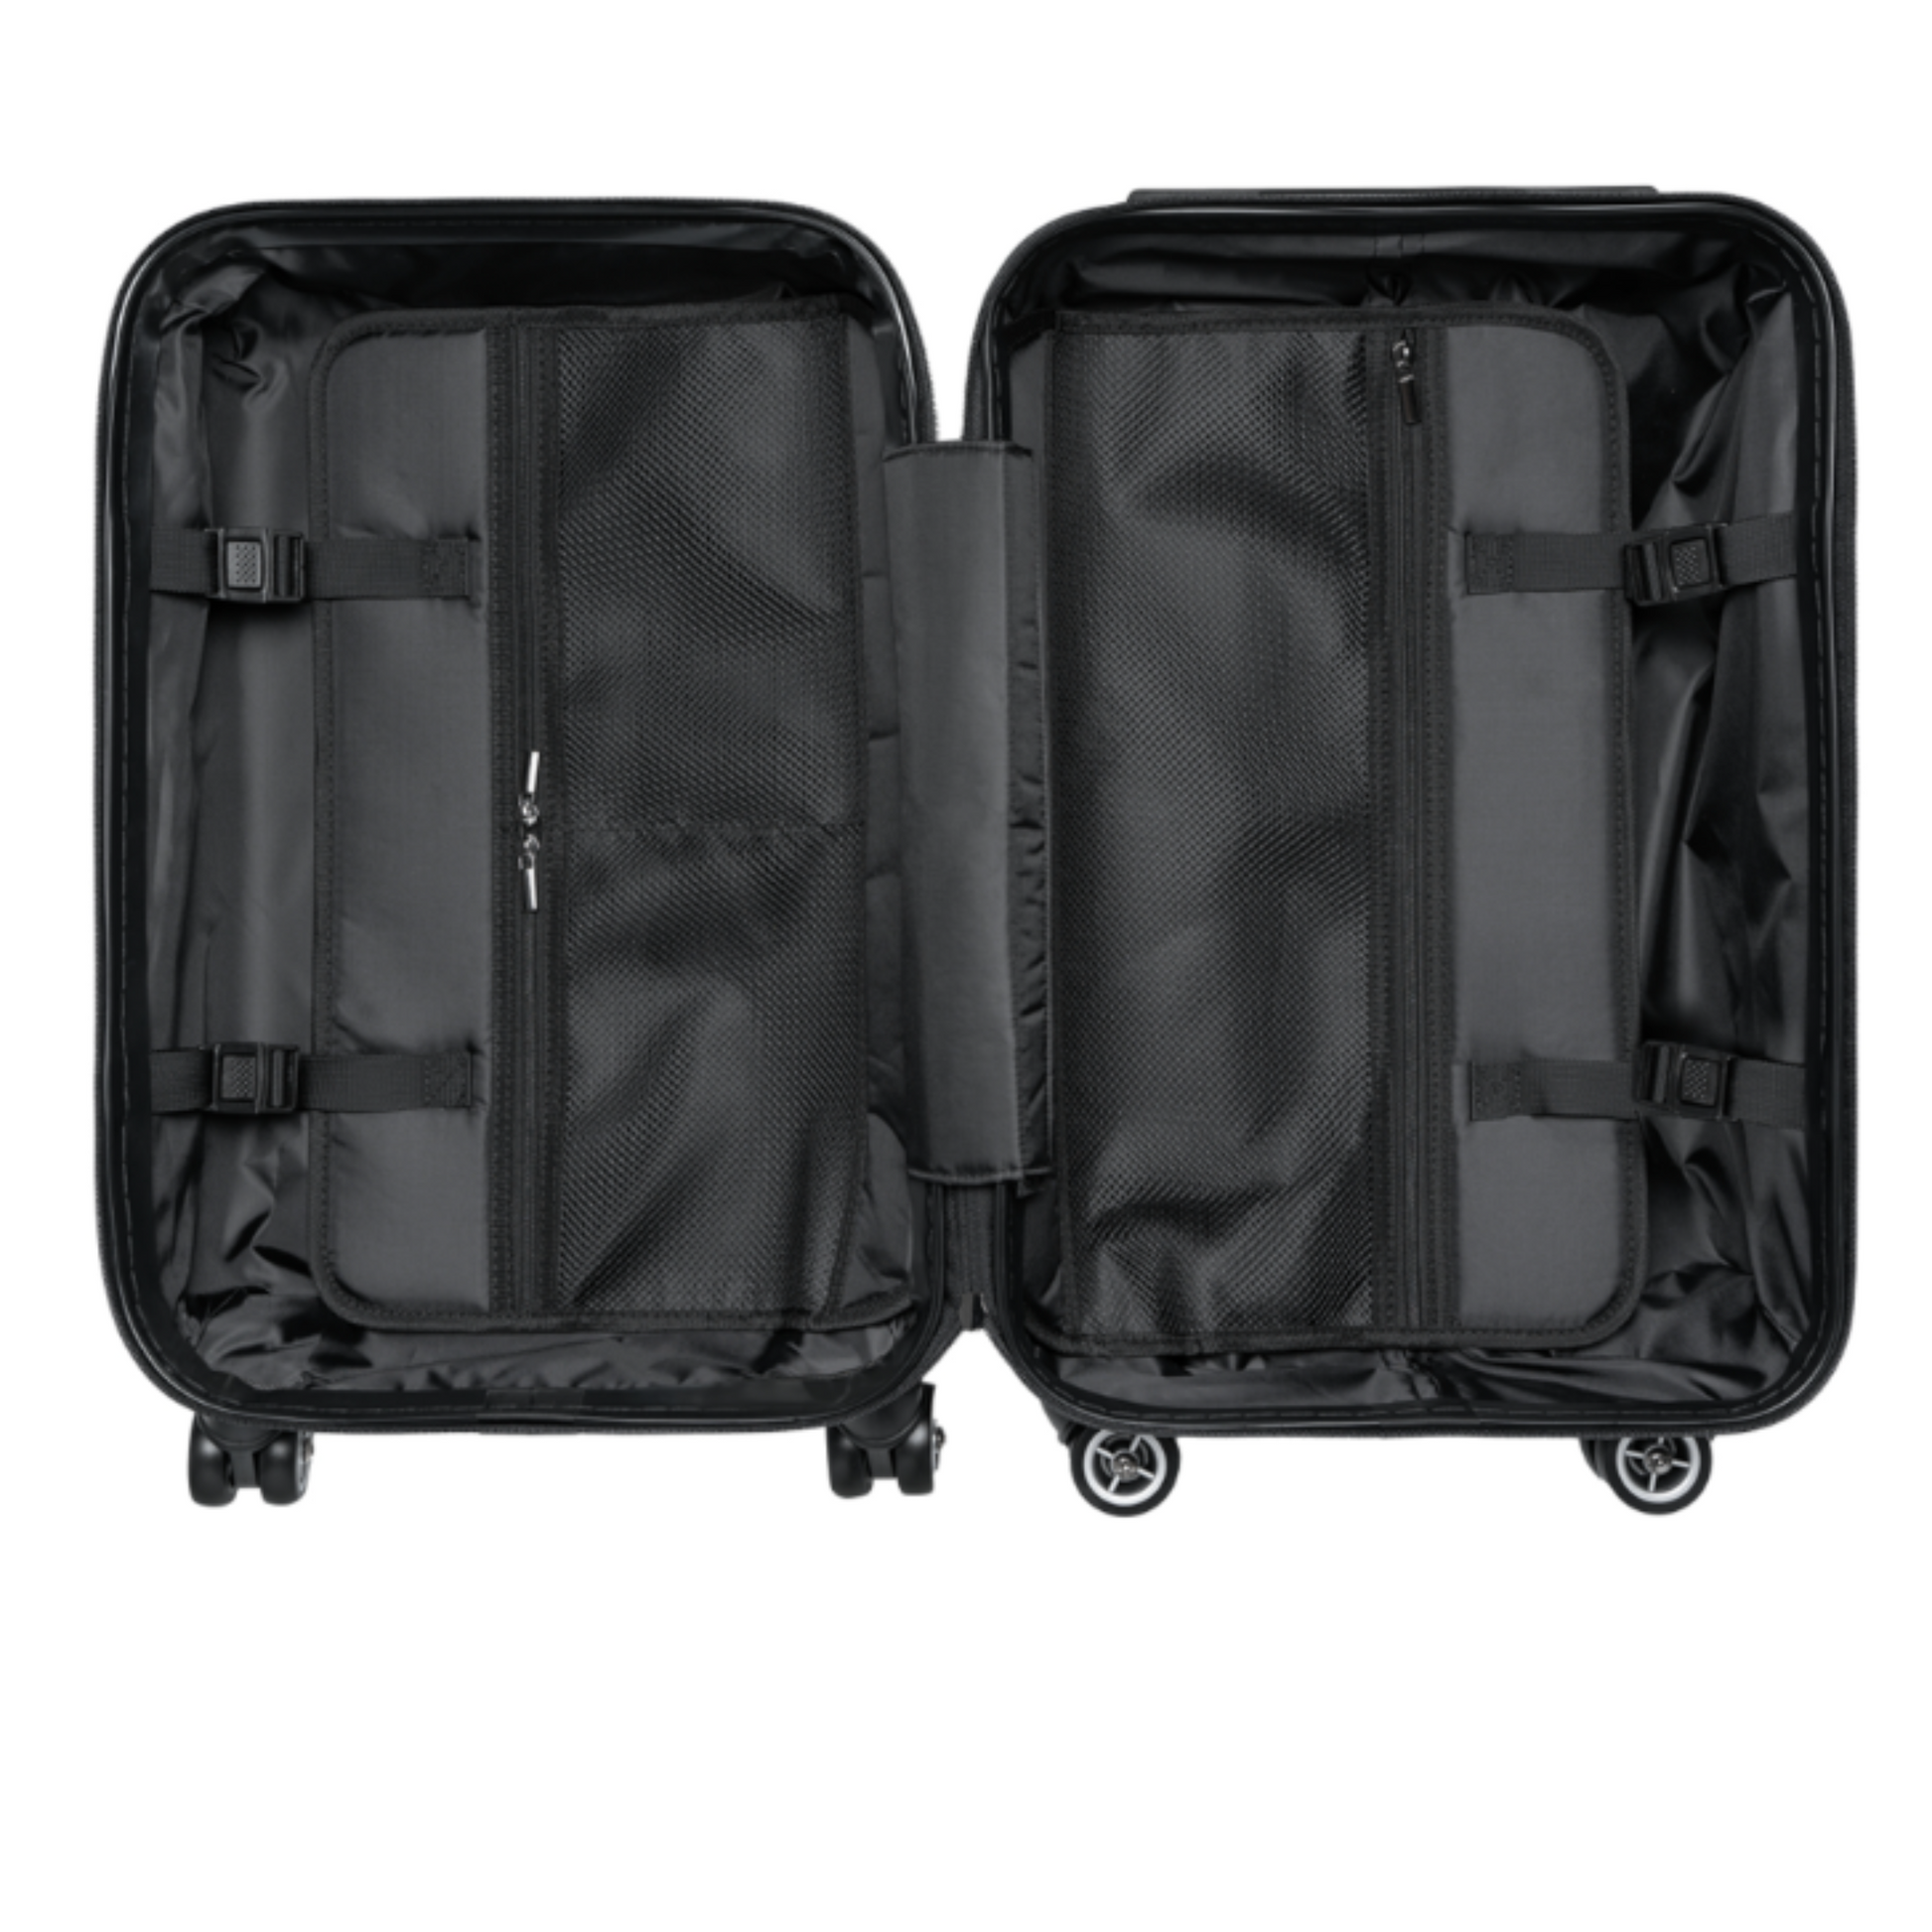 The inside of our luggage has dividers with clasps on both sides for holding your personal belongings in when you close the suitcase.